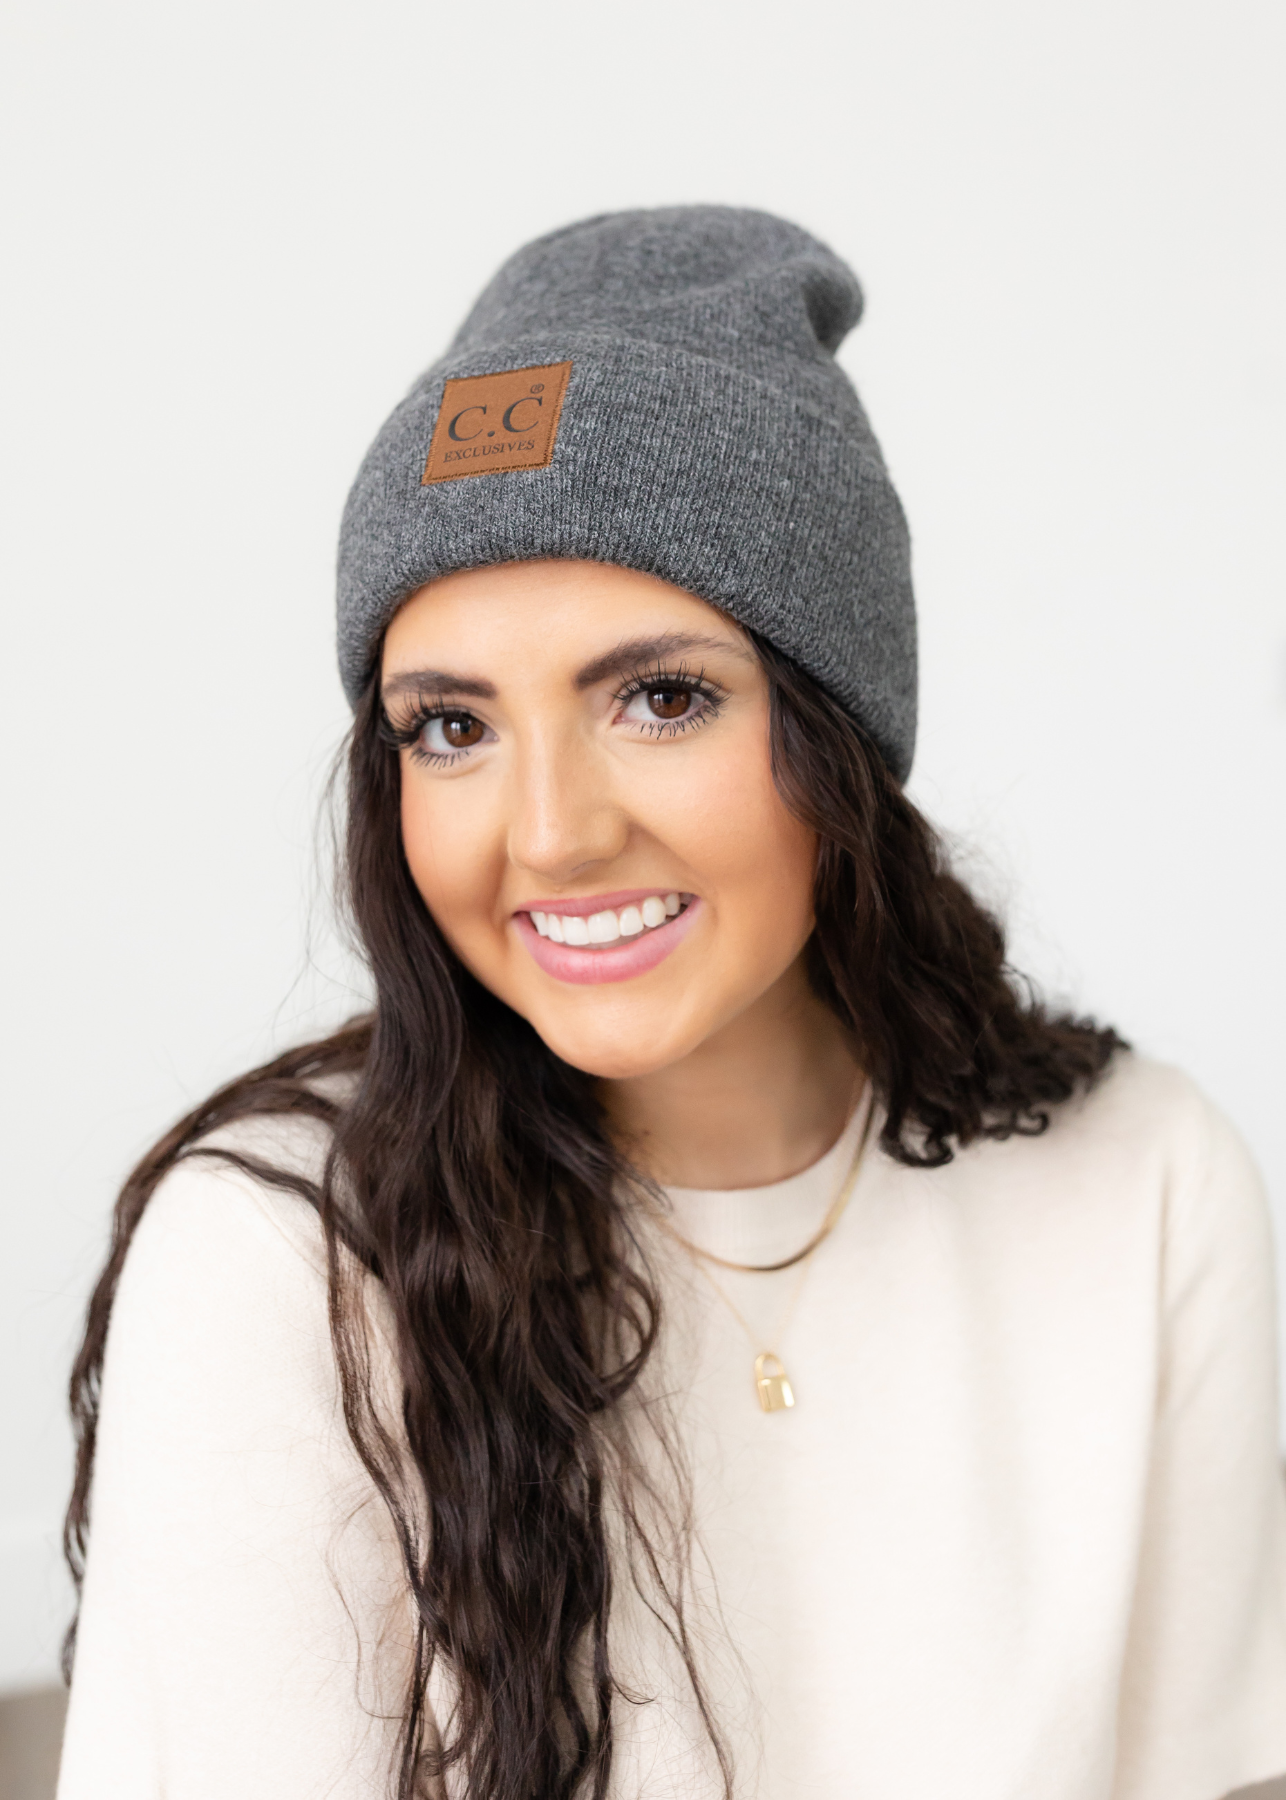 Shannon Charcoal Knit Beanie